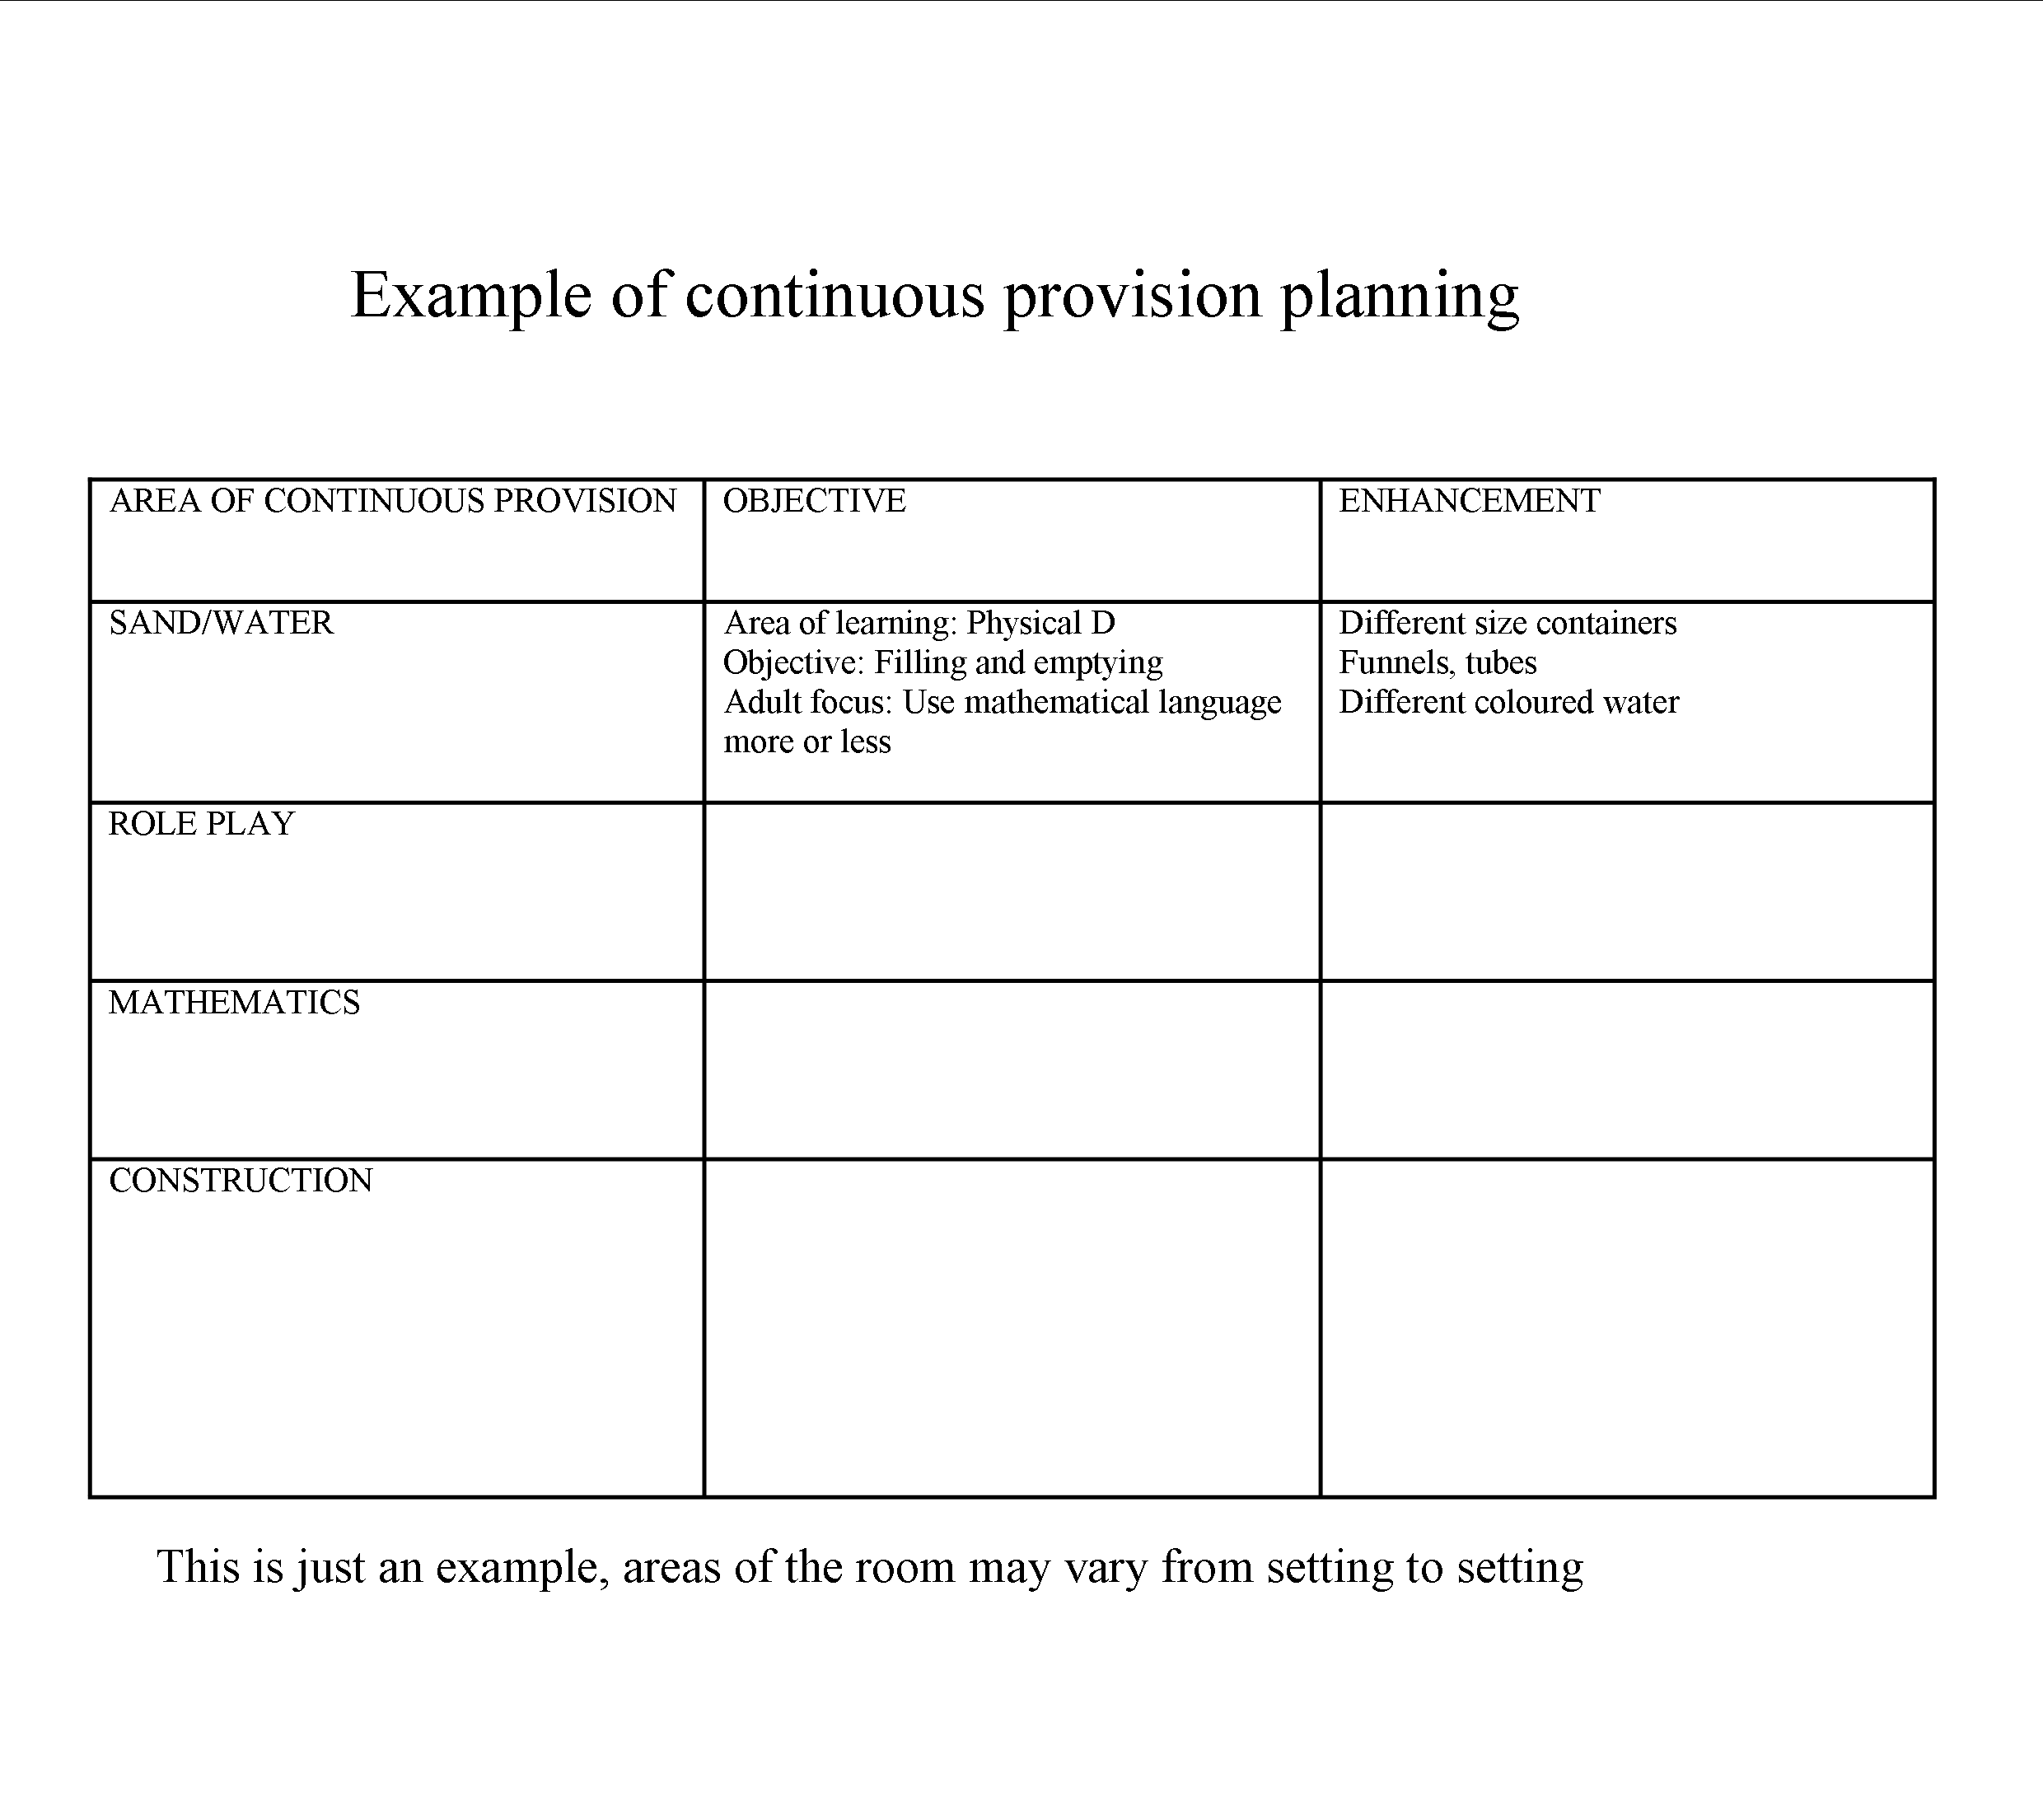 Example of continuous provision planning